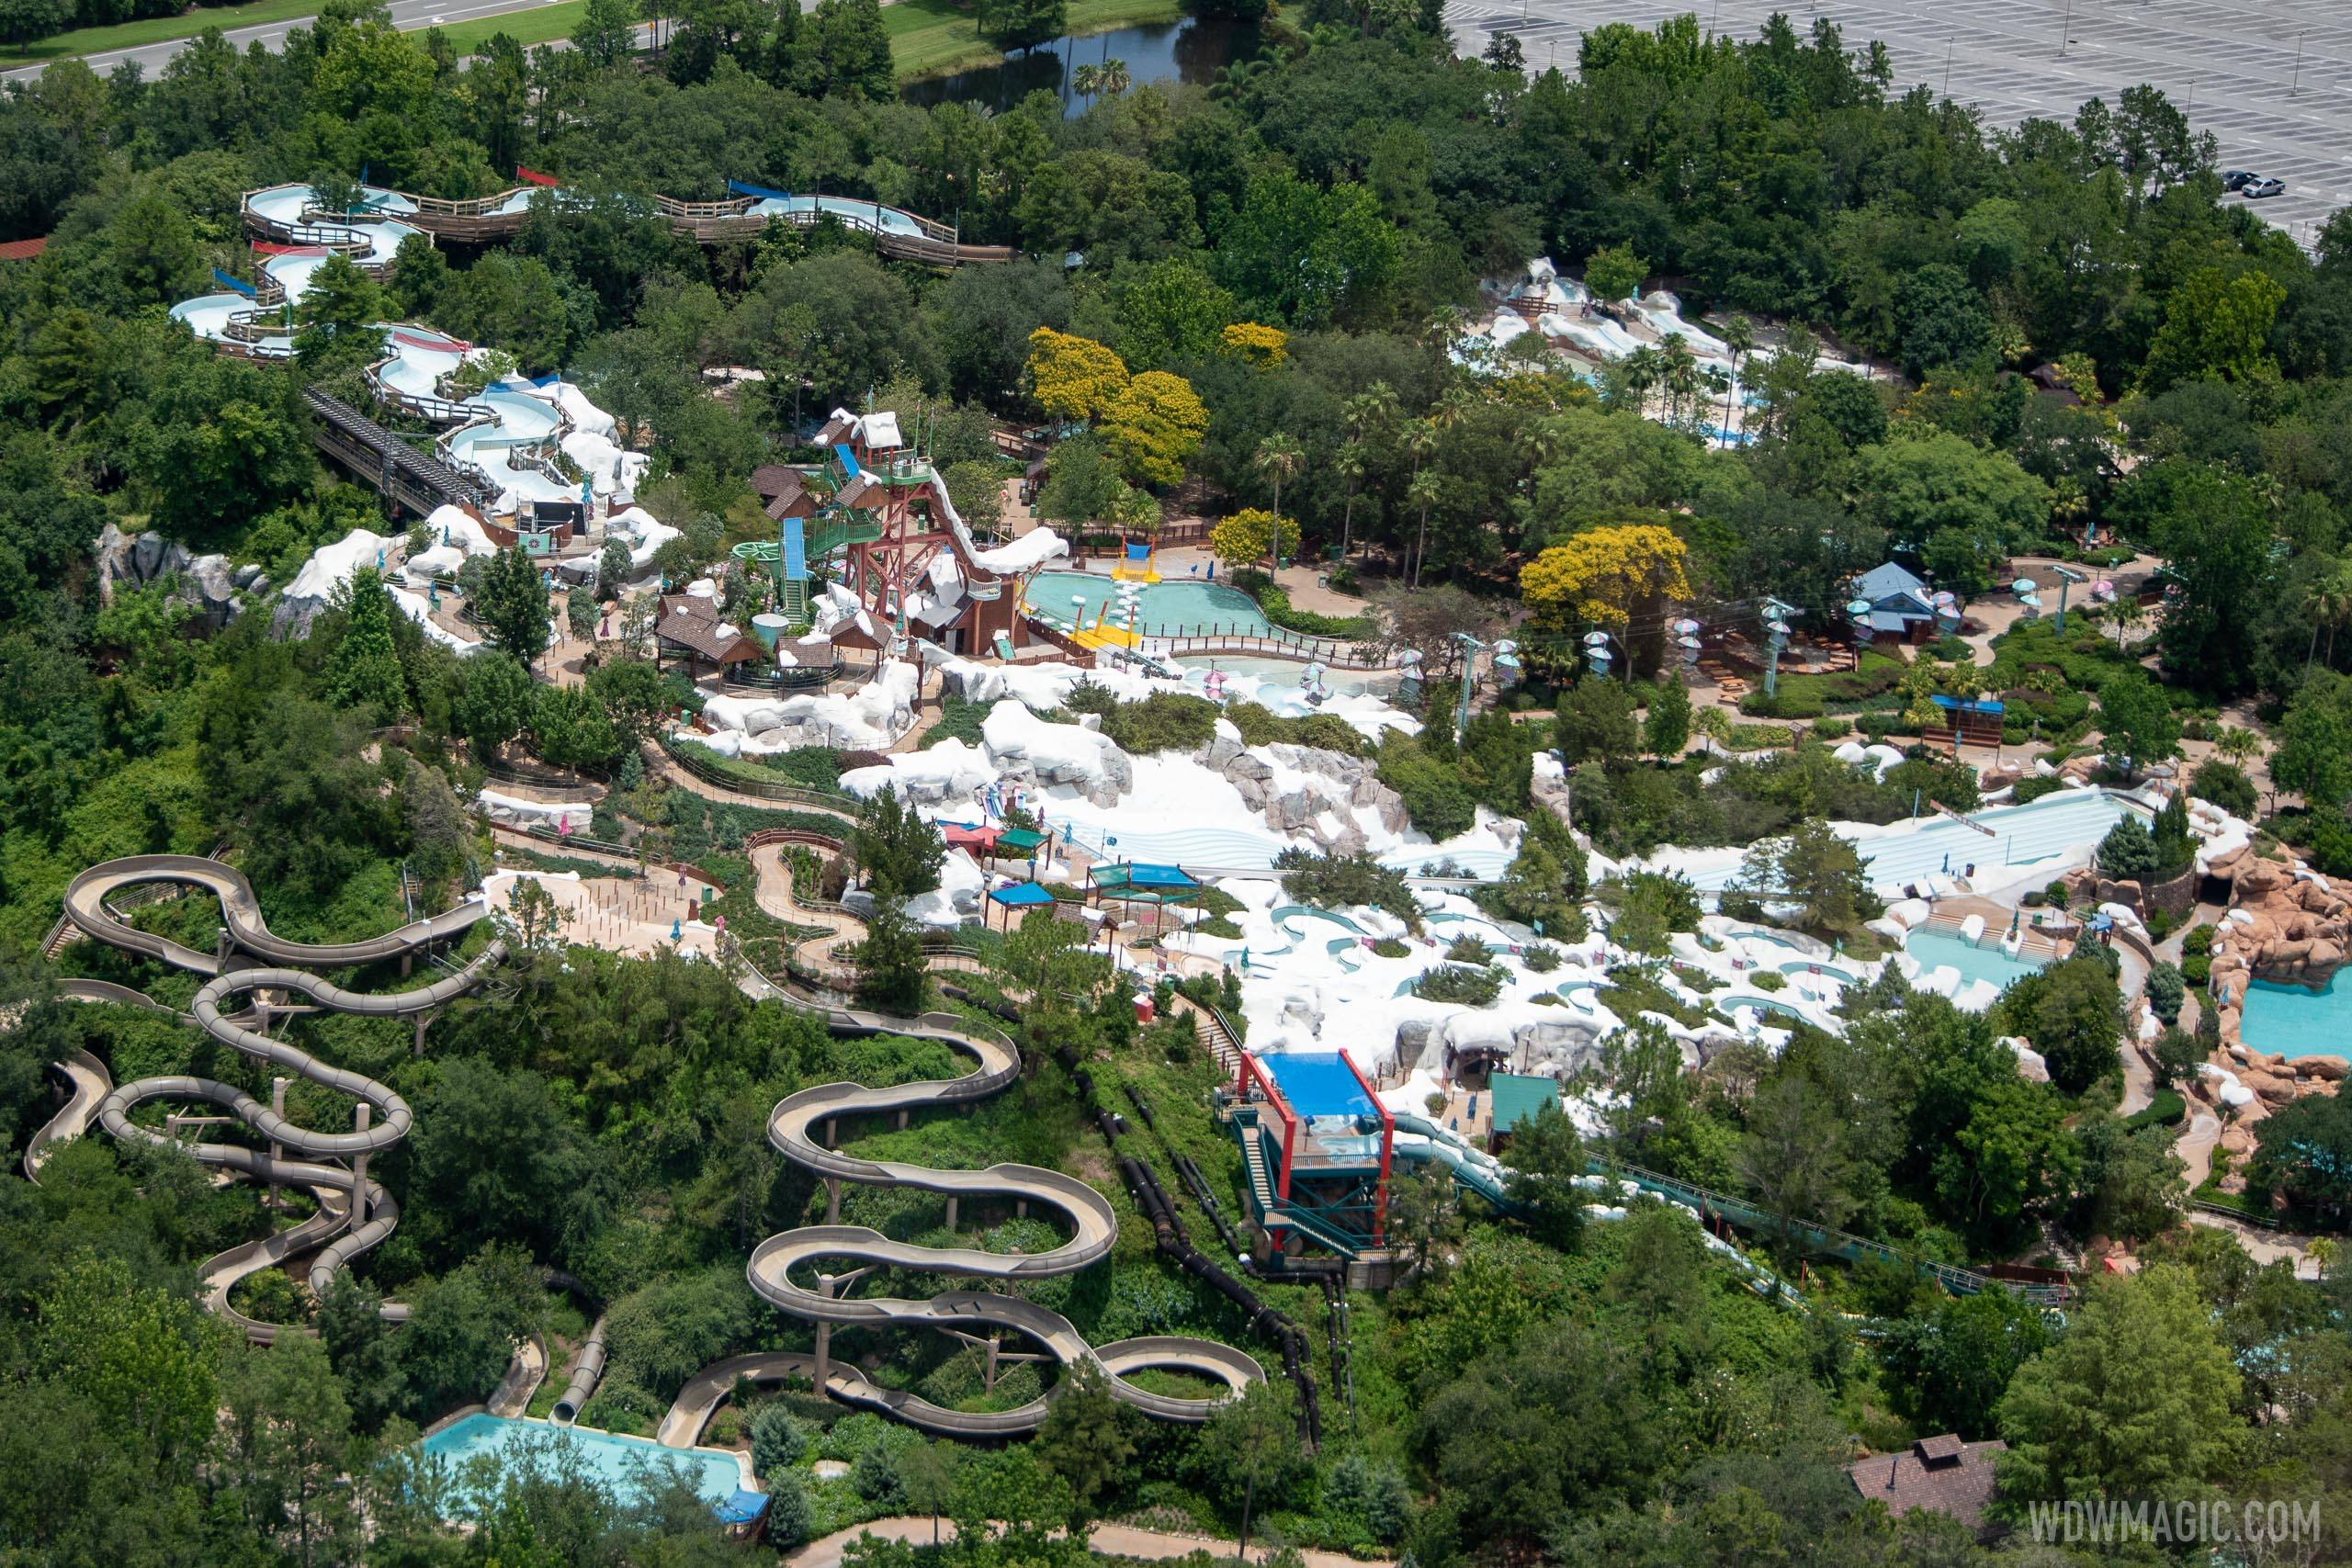 Blizzard Beach will be closed today